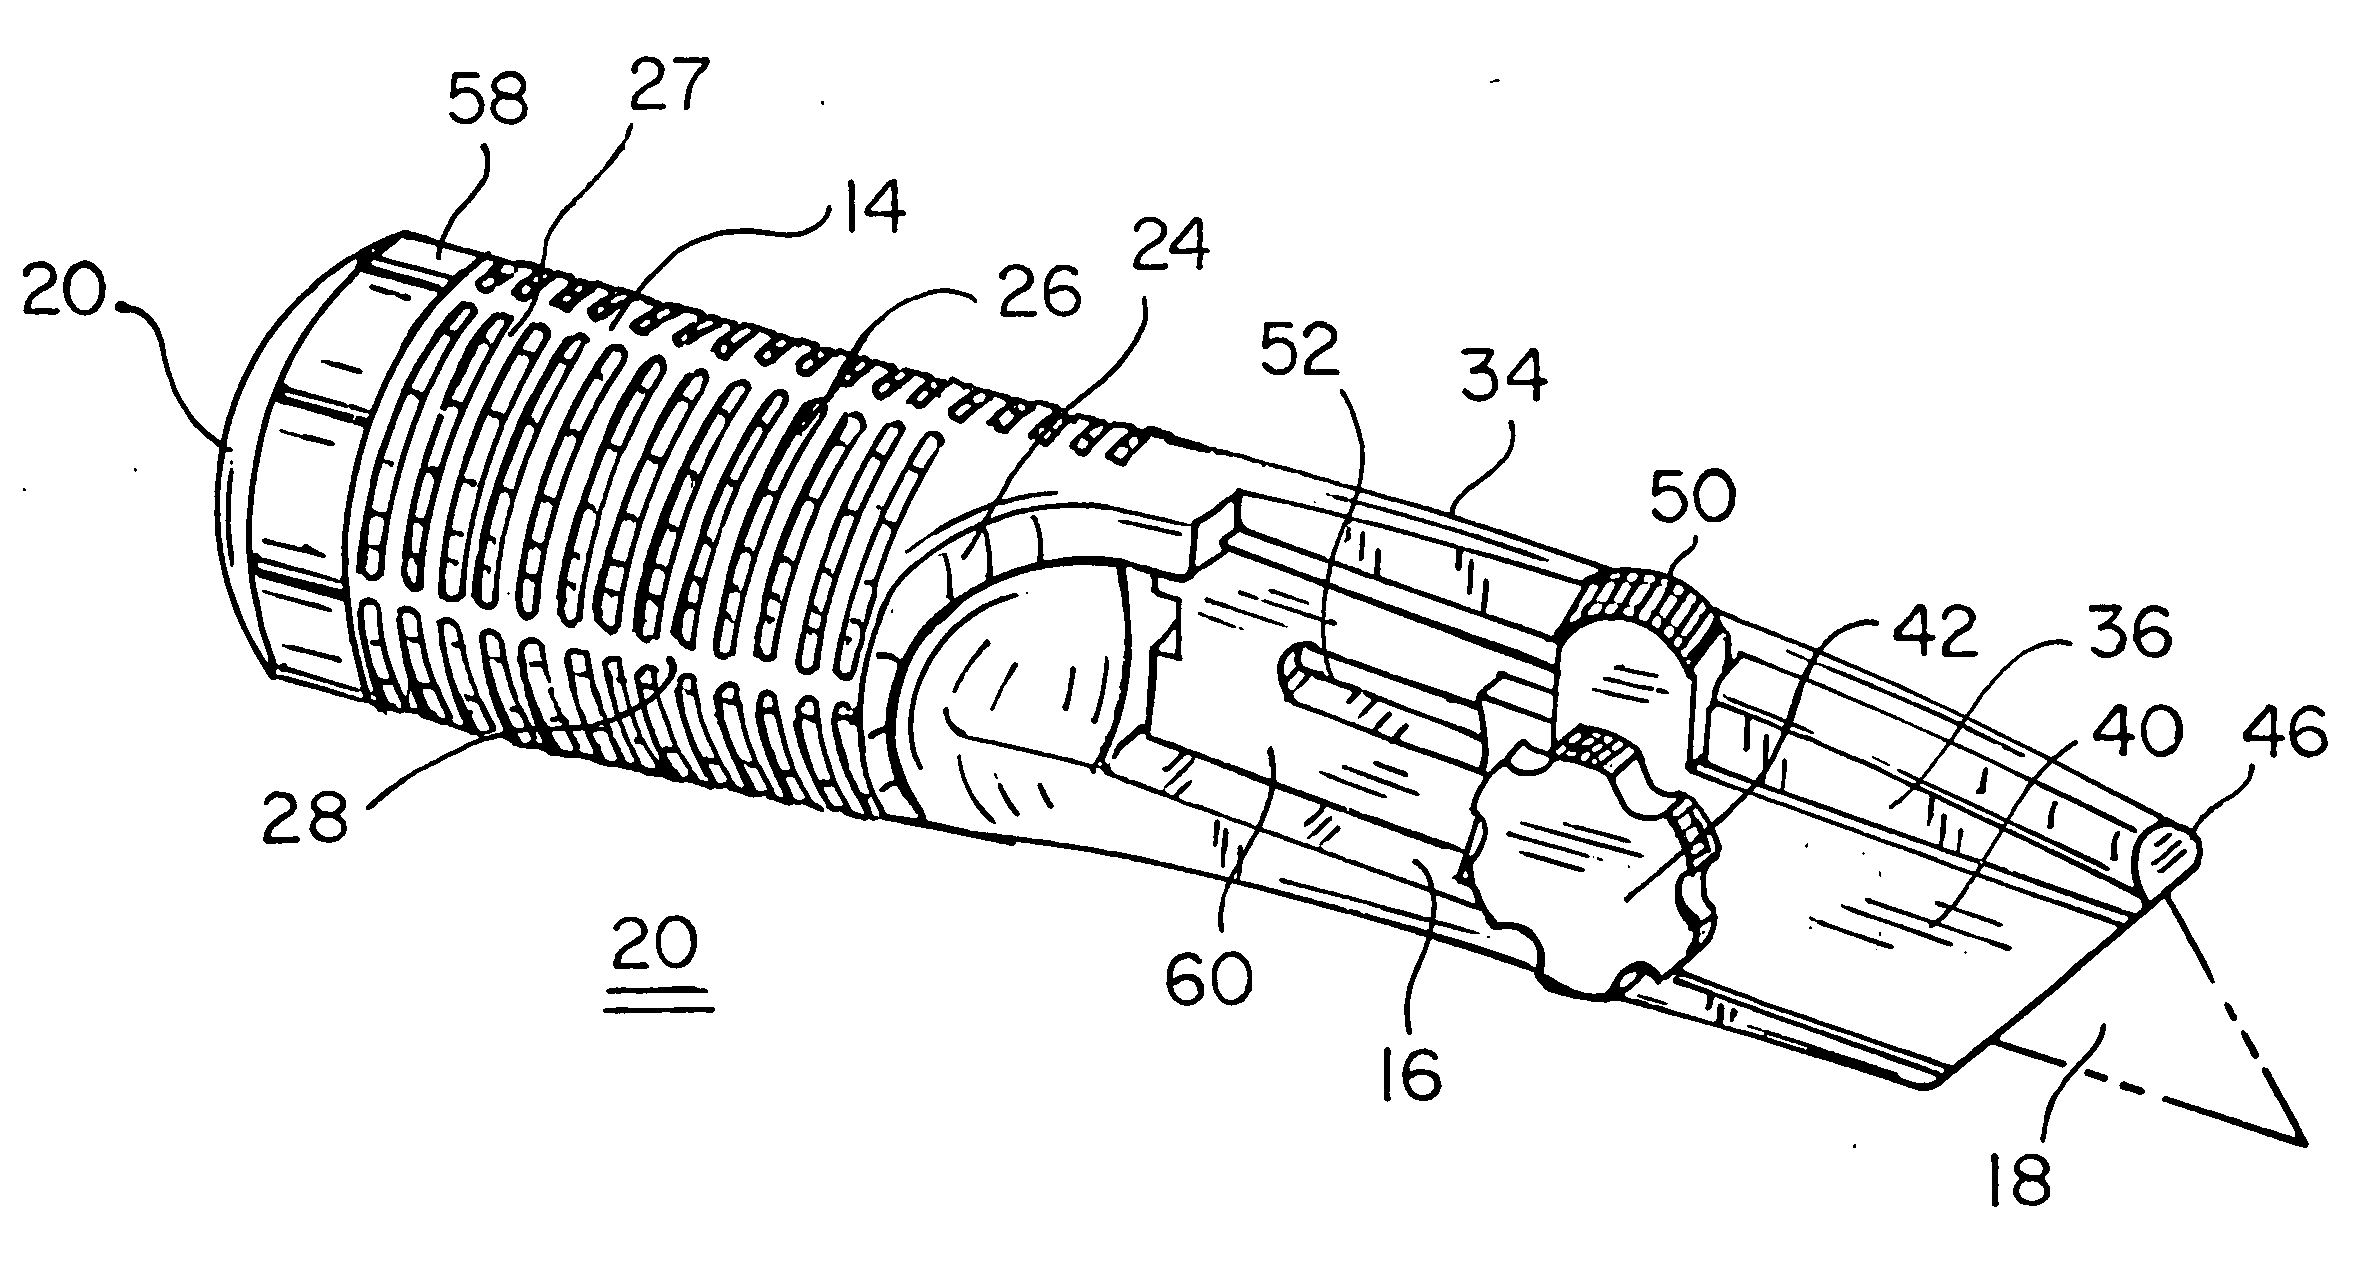 Utility knife with retractable blade